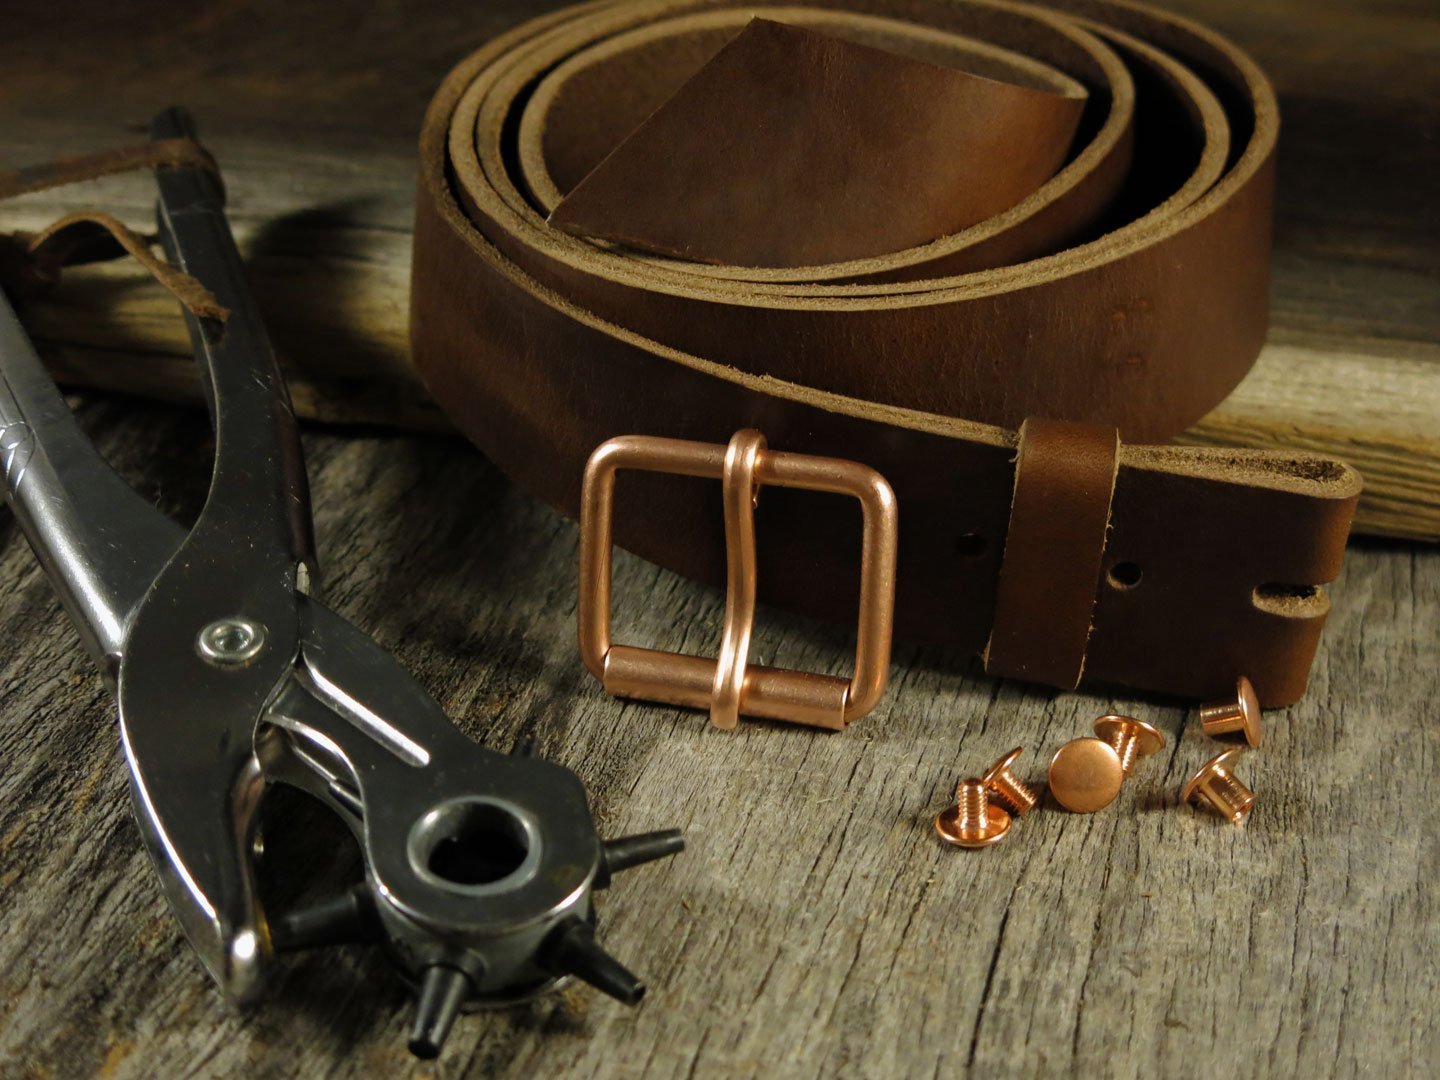  SLC Belt Making Kit for Beginners with Stamping Tools